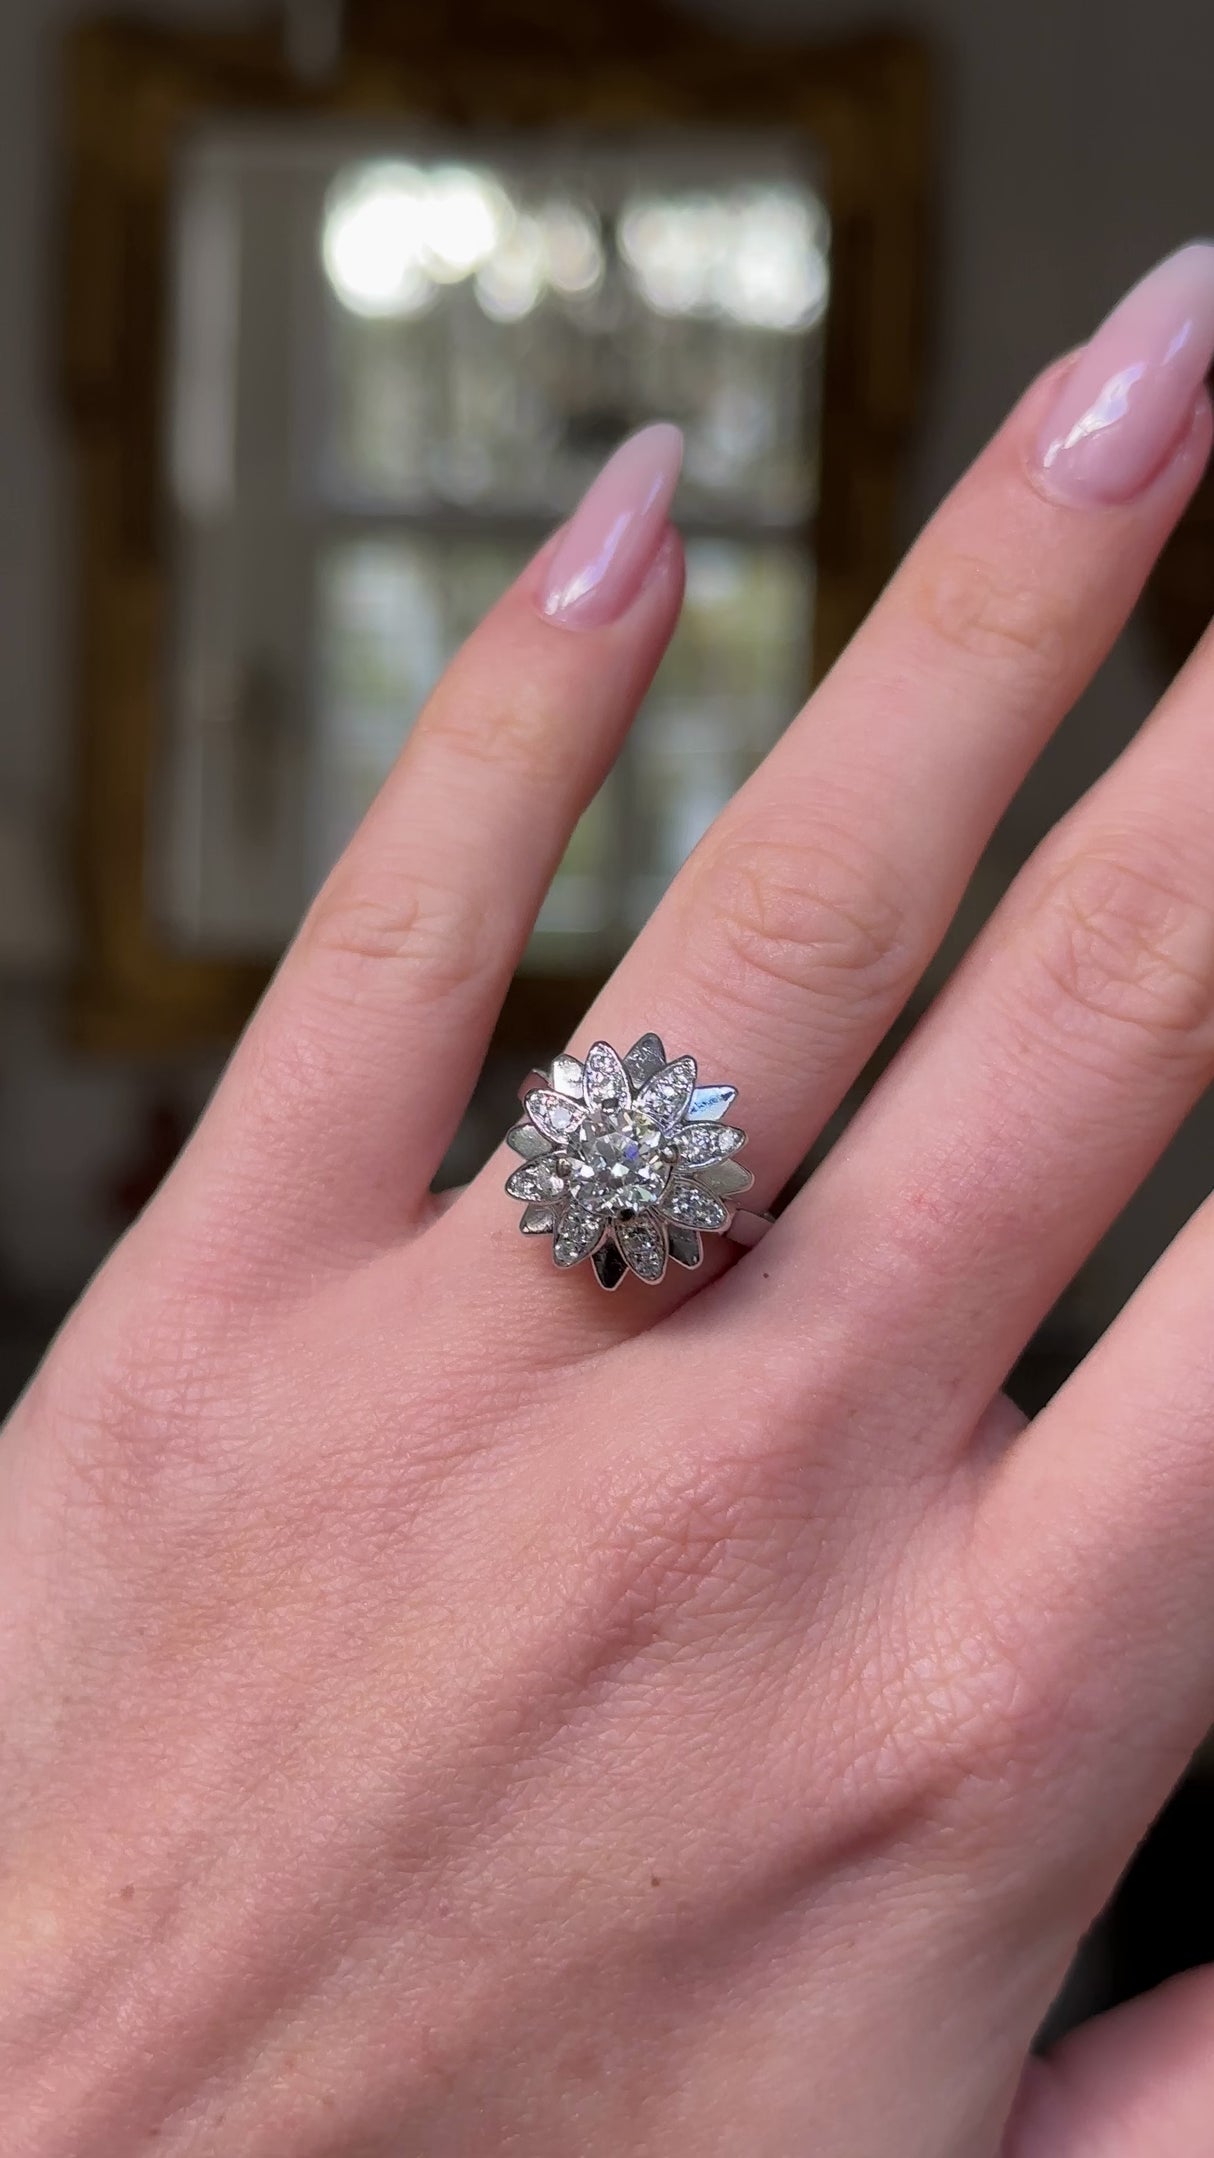 french diamond engagement ring resembling a flower worn on hand, moved away from camera to give perspective. 